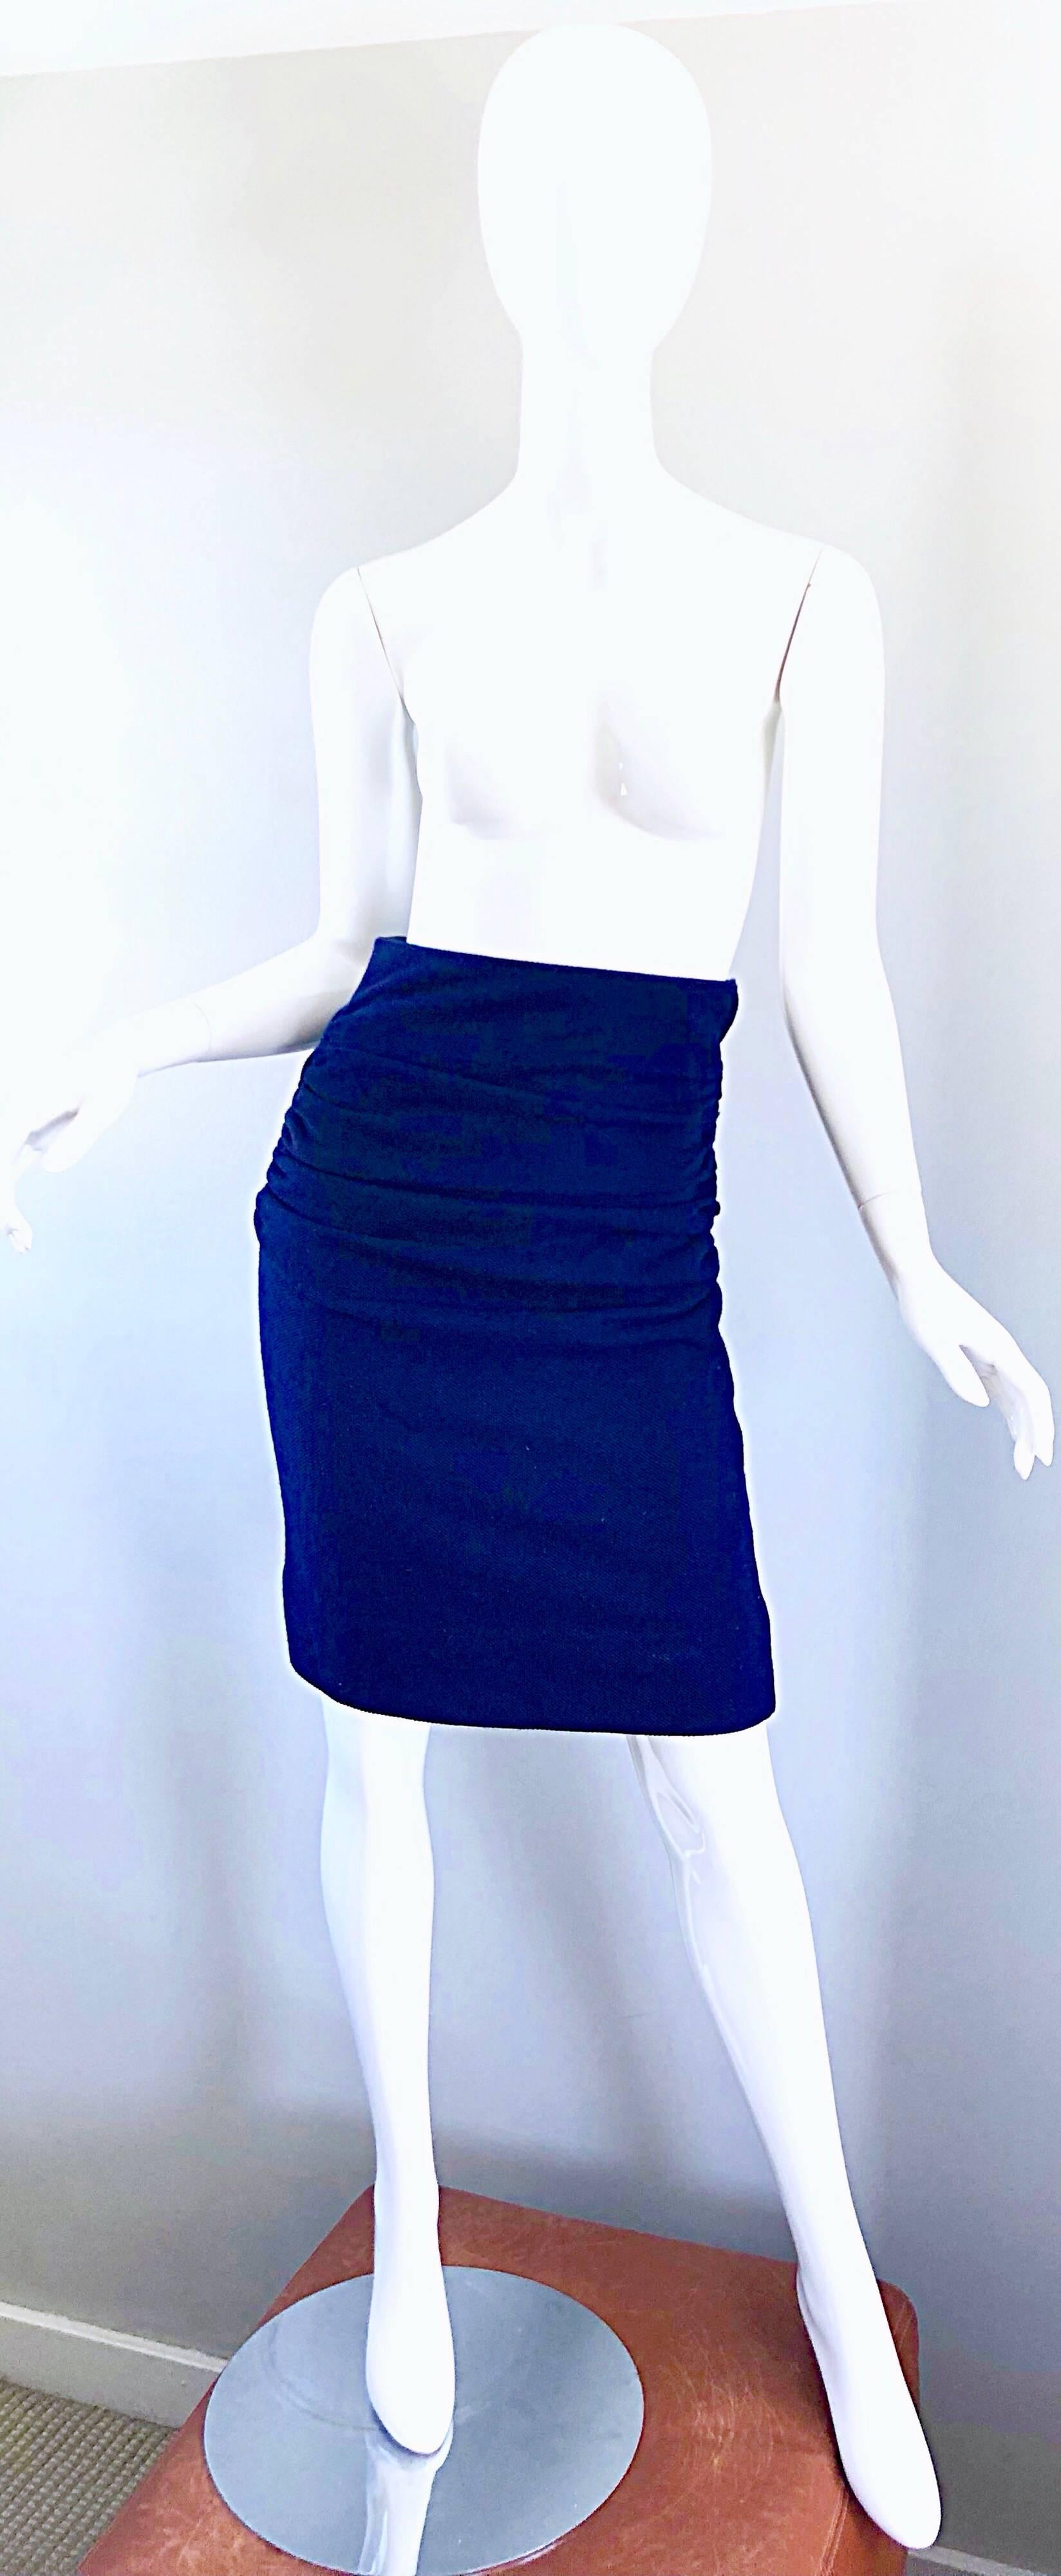 Super flattering early 1990s KARL LAGERFELD navy blue ruched virgin wool high waisted pencil skirt! Not just your basic pencil skirt...This gem features a dark midnight / navy blue soft textured virgin wool. Super flattering and forgiving ruching